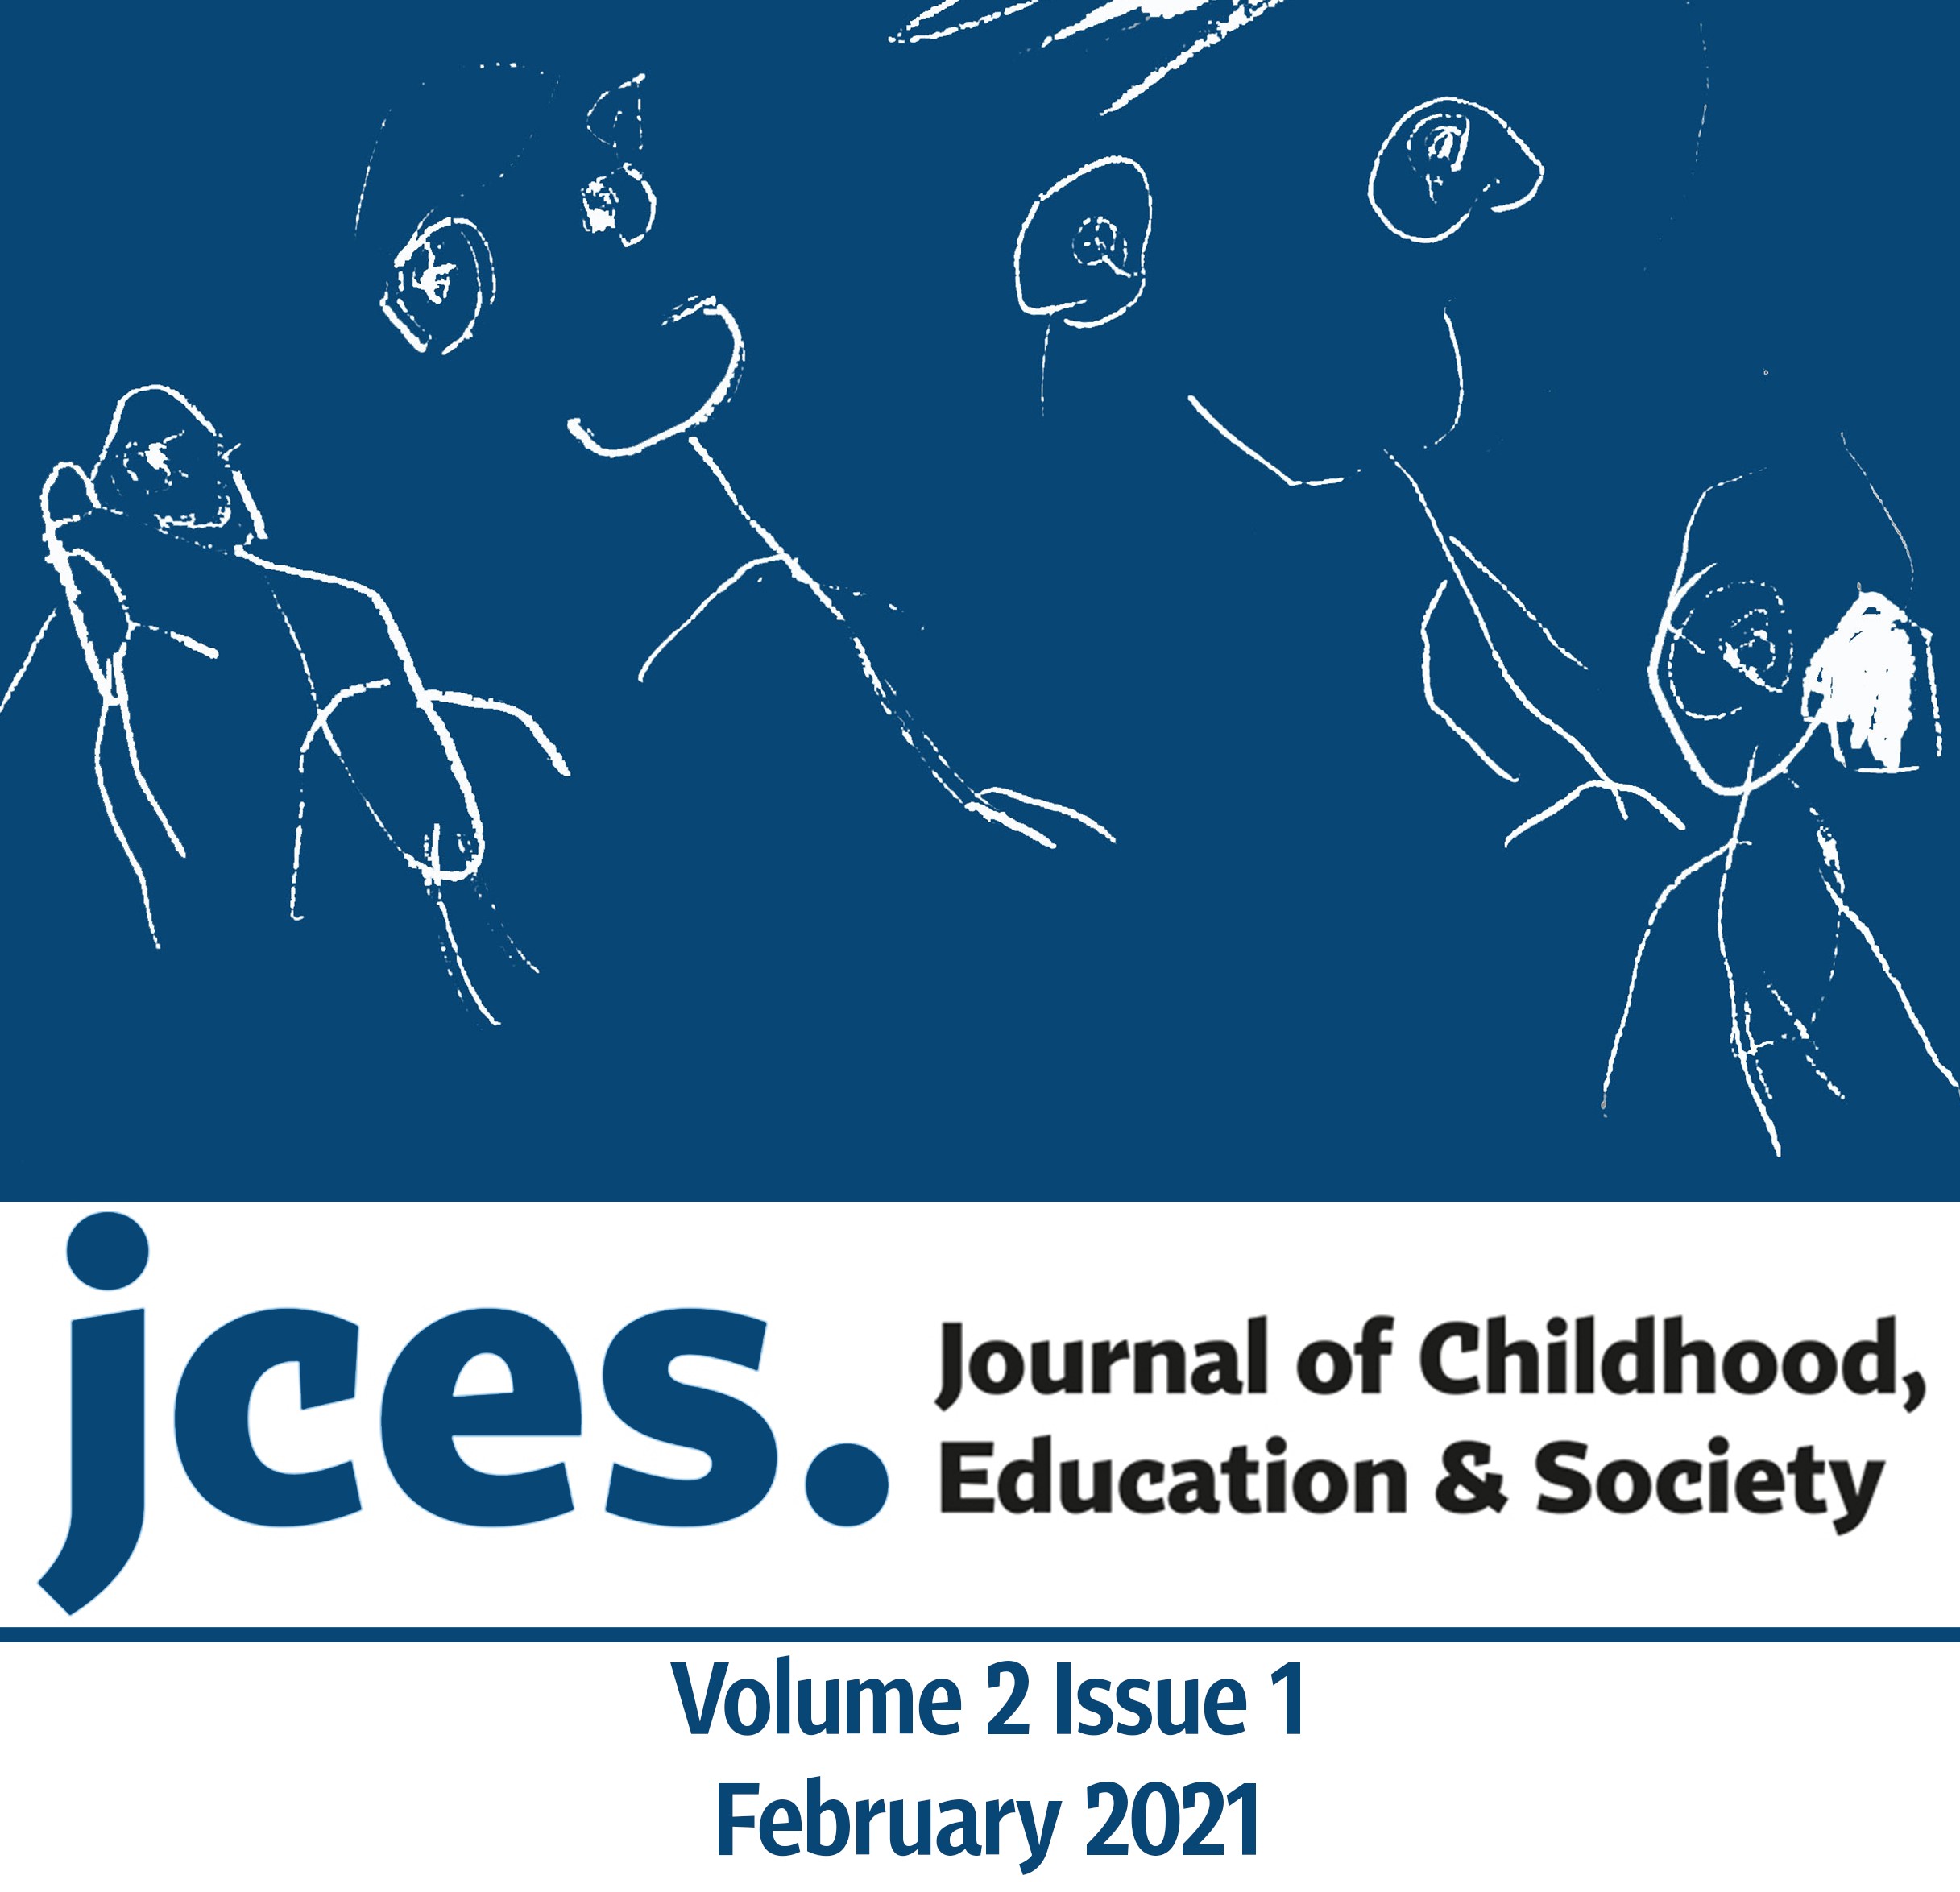 					View Vol. 2 No. 1 (2021): Journal of Childhood, Education & Society
				